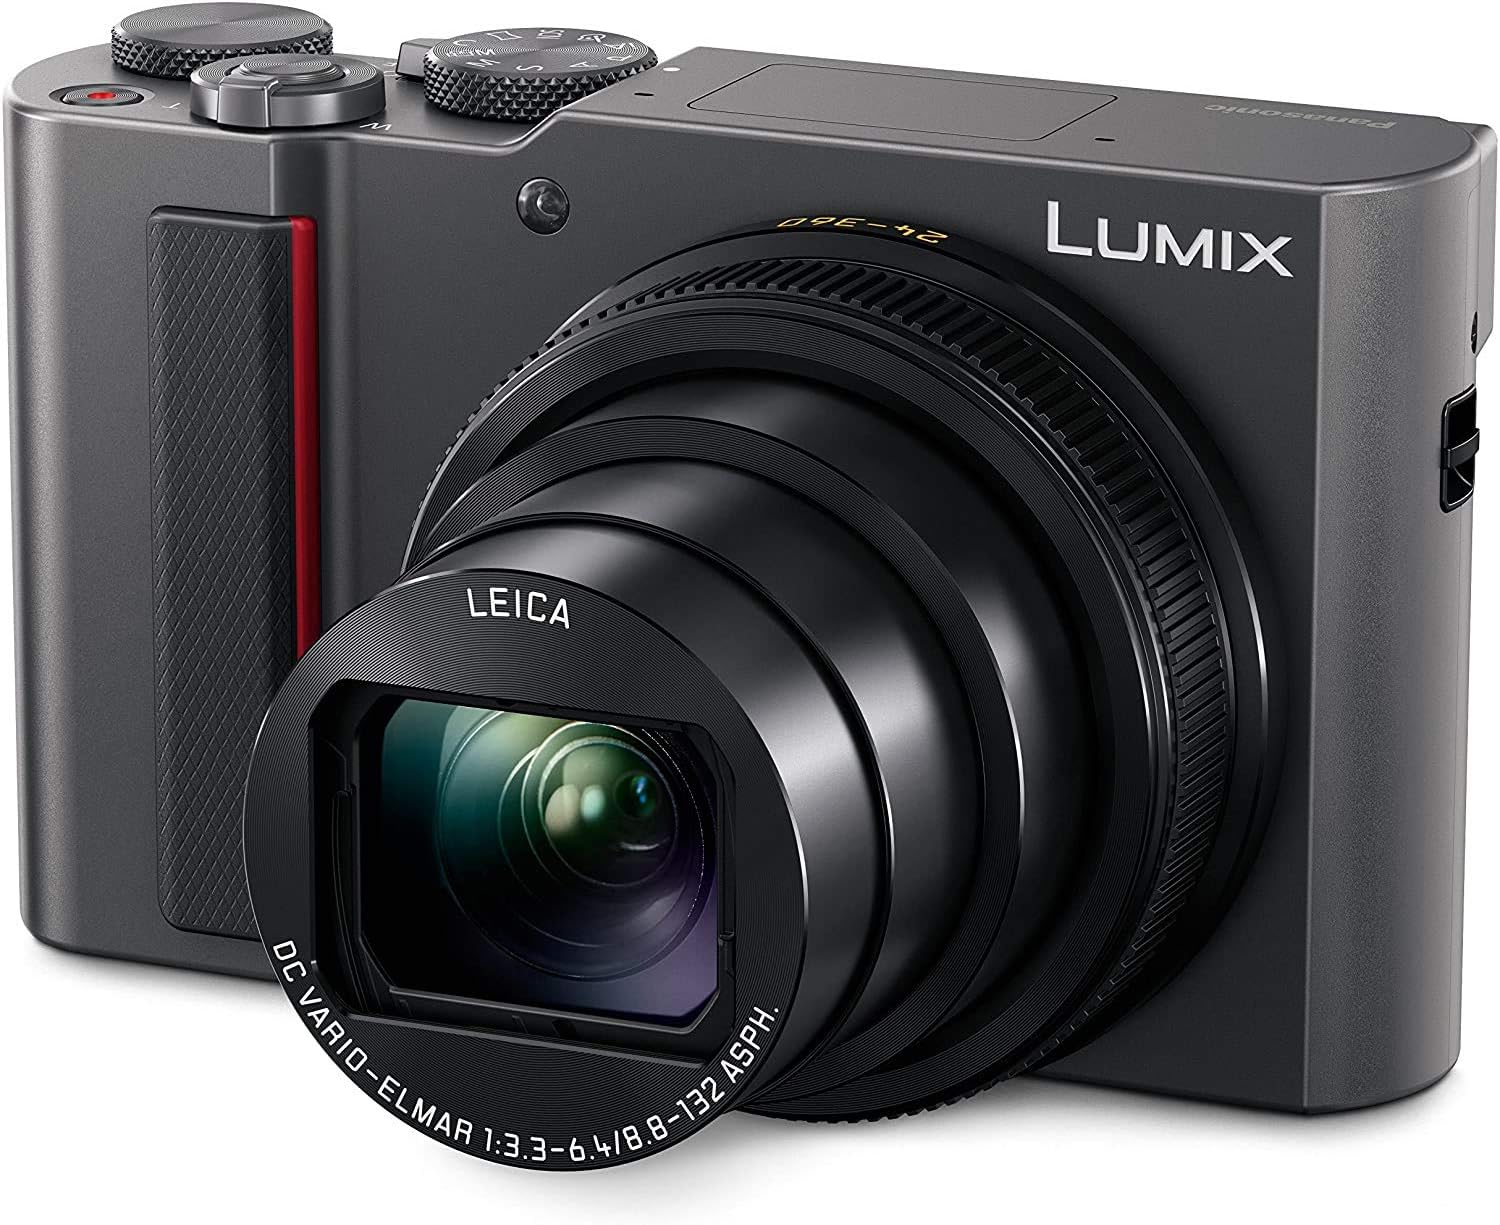 Panasonic LUMIX ZS200D Review: Mixed Experiences with Image Quality and Versatility